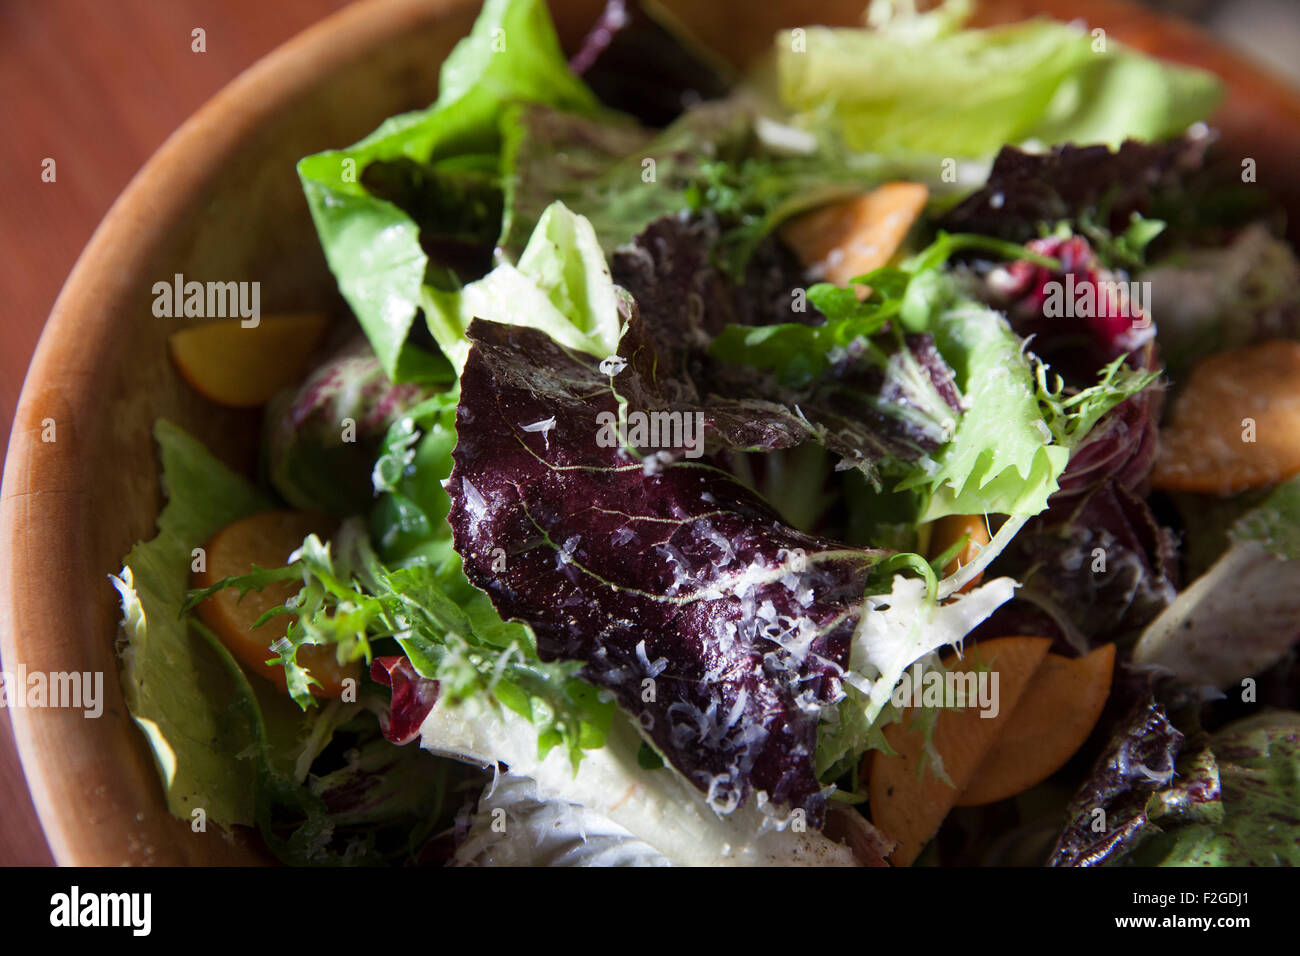 chicory salad in wooden bowl Stock Photo